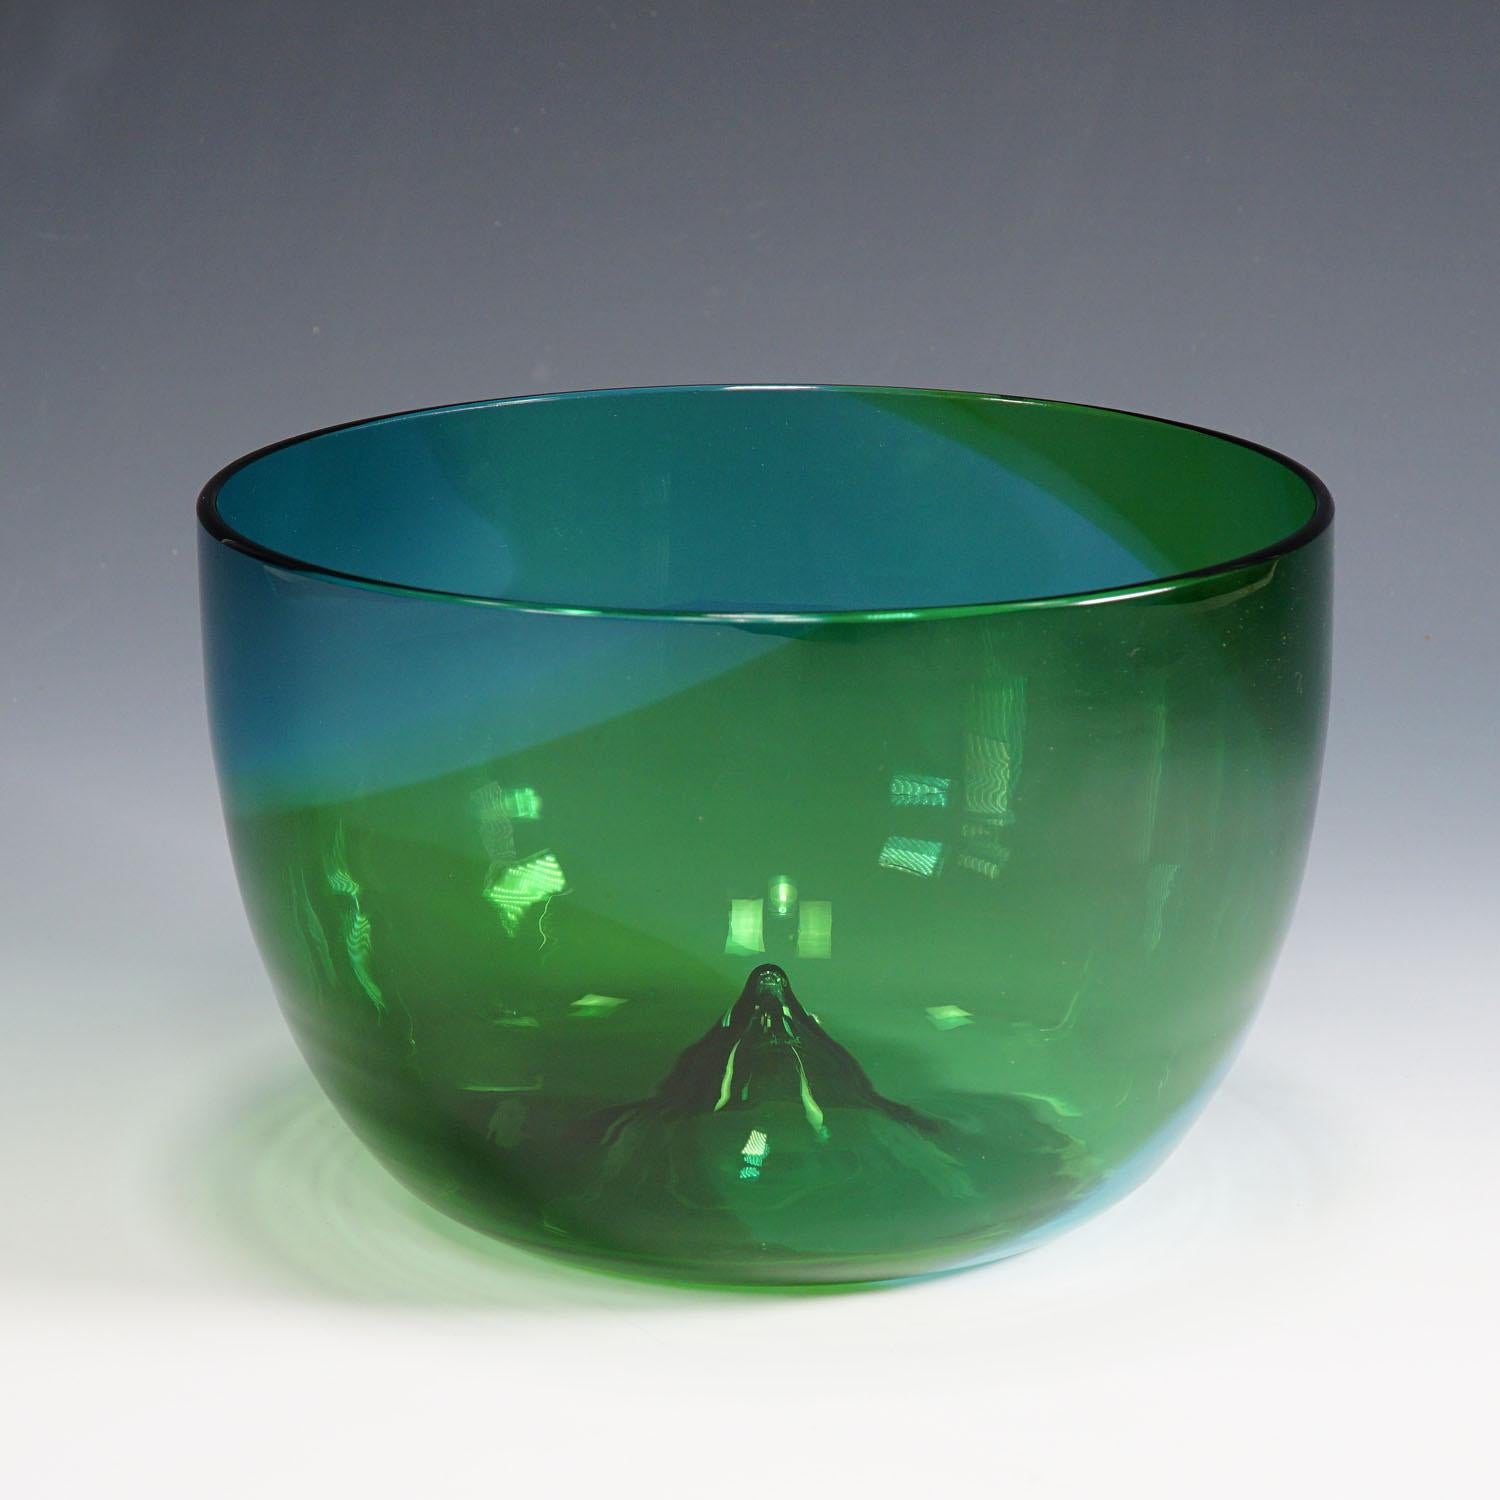 A blue and green a fasce a spirale bowl from the Coreani series. Designed in 1966 by Tapio Wirkkala for Venini. Produced by Venini, Murano. Incised signature 